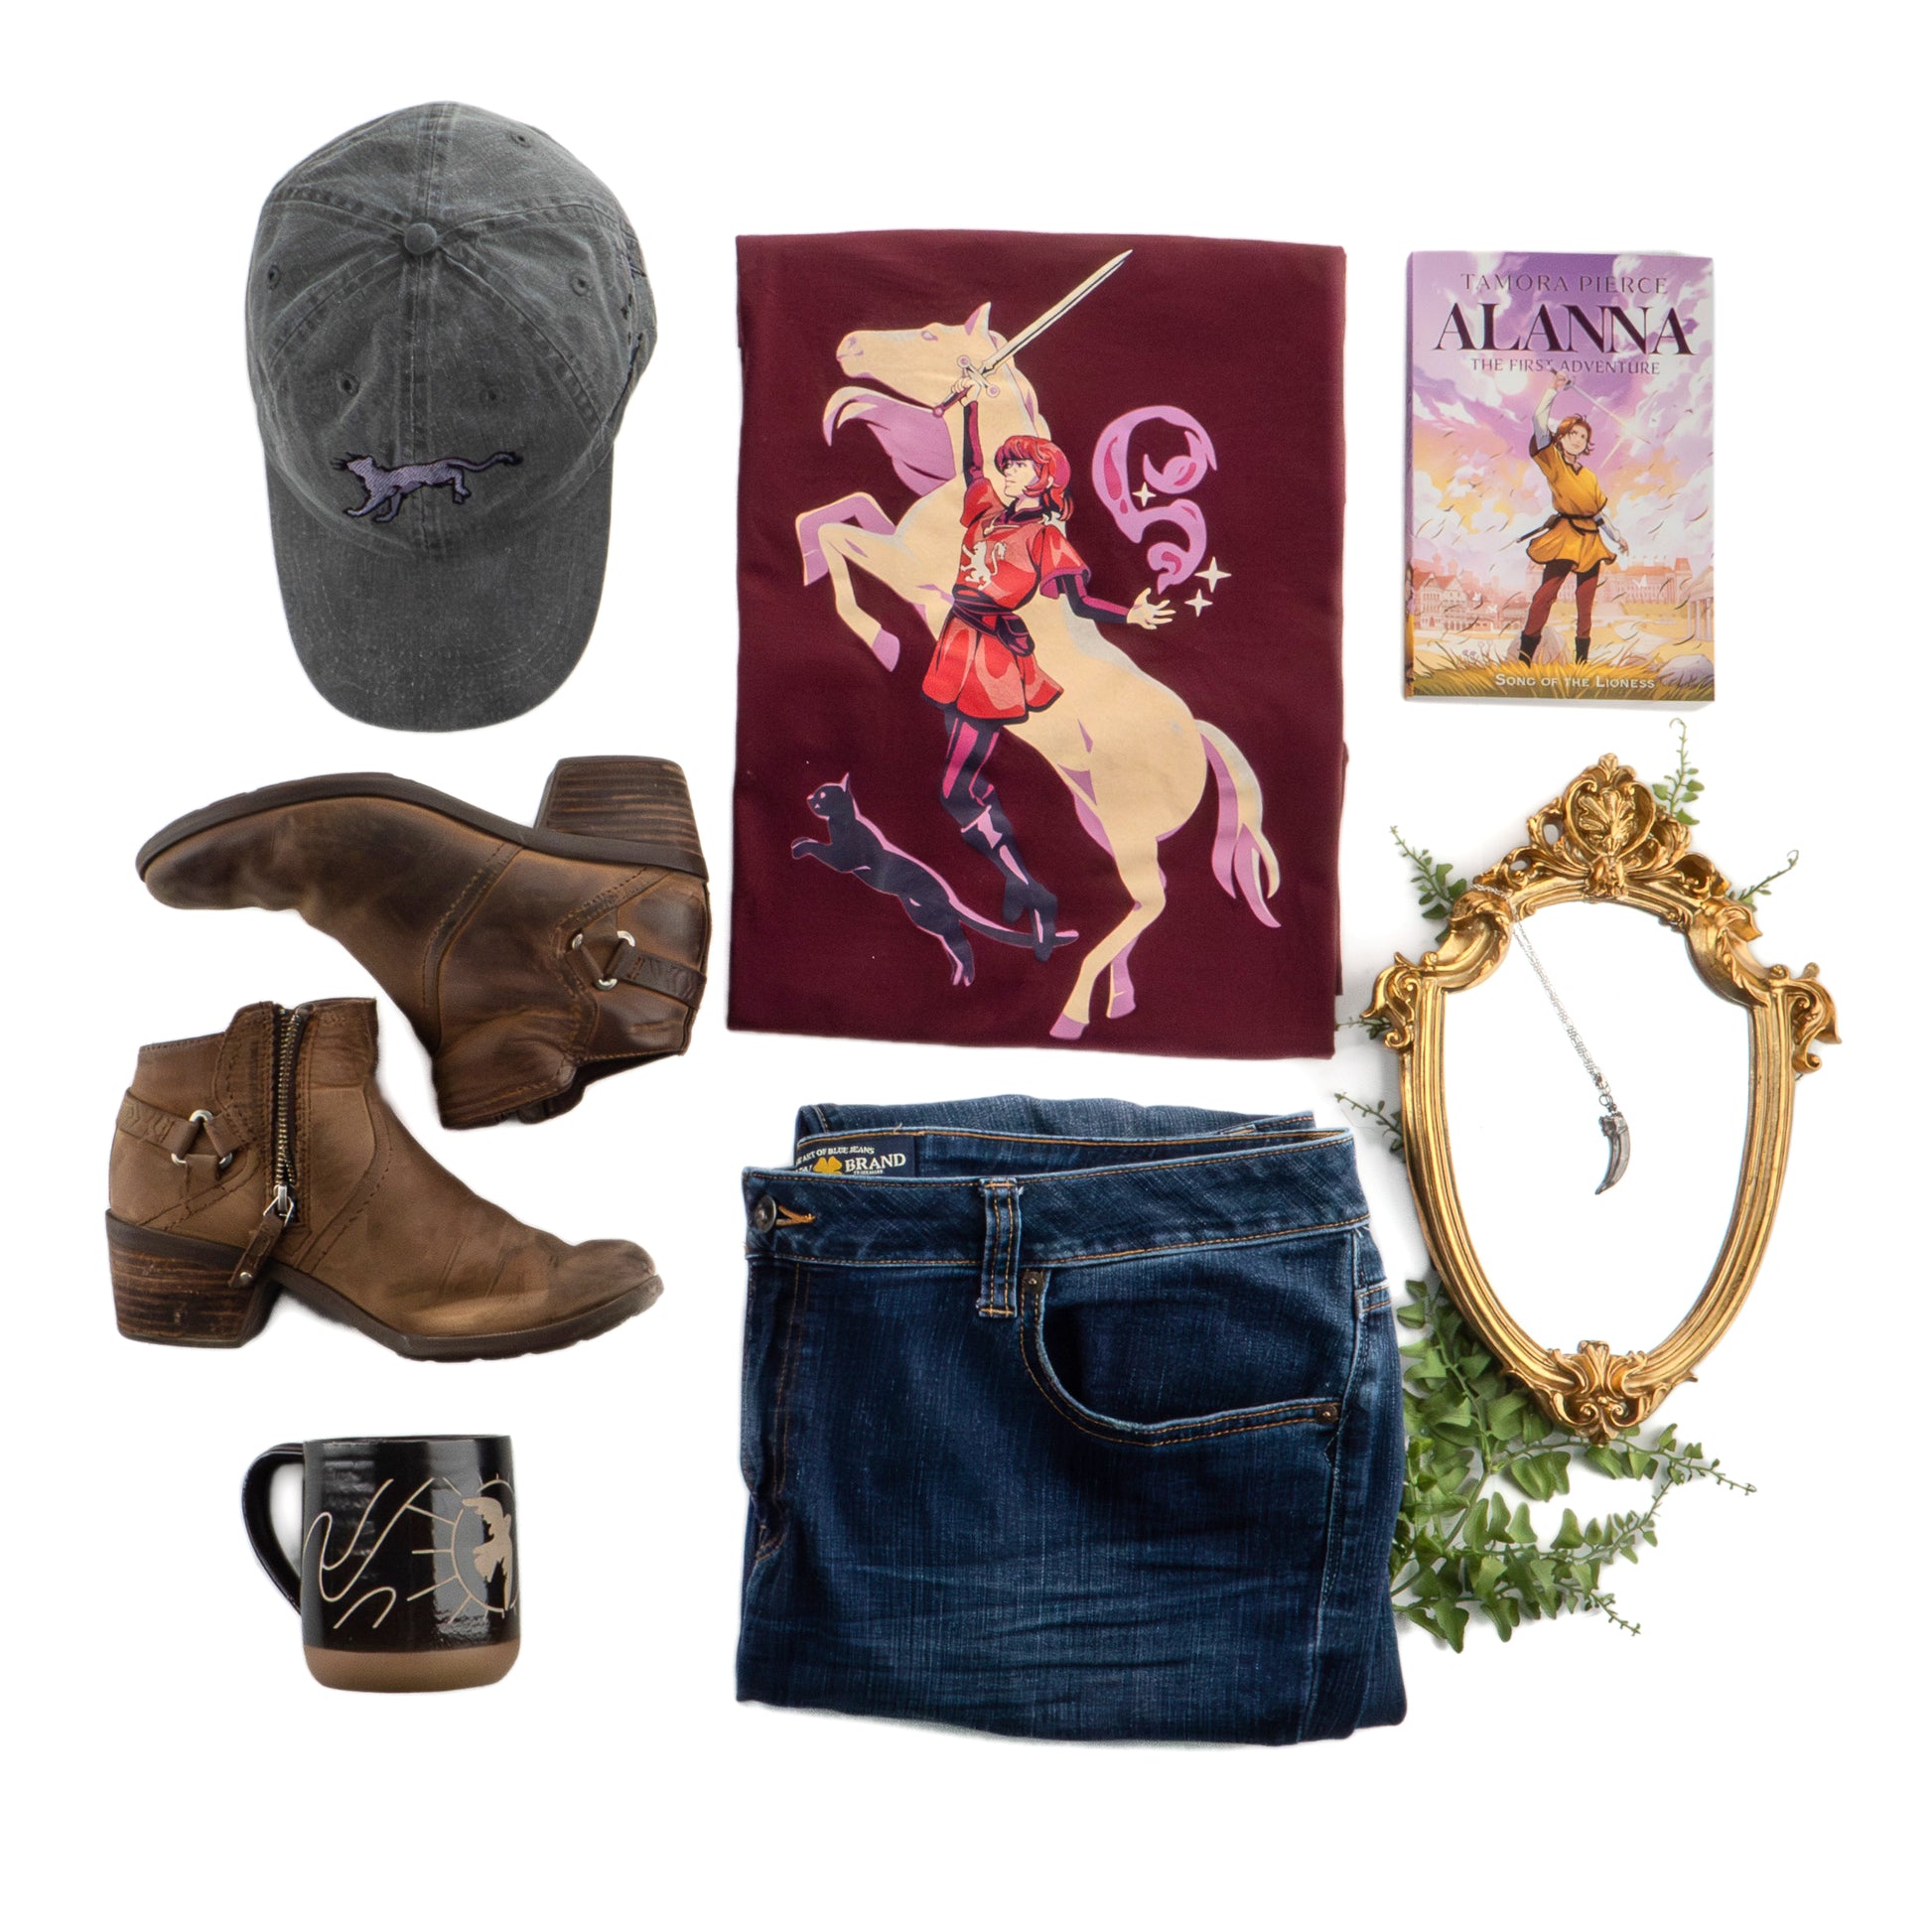 the long-sleeve t-shirt is folded into a neat rectangle, surrounded by a black ballcap, brown boots, a folded pair of denim jeans, the Dancing Dove mug, an Alanna book, a mirror with the badger claw pendant laid on top, and some foliage.